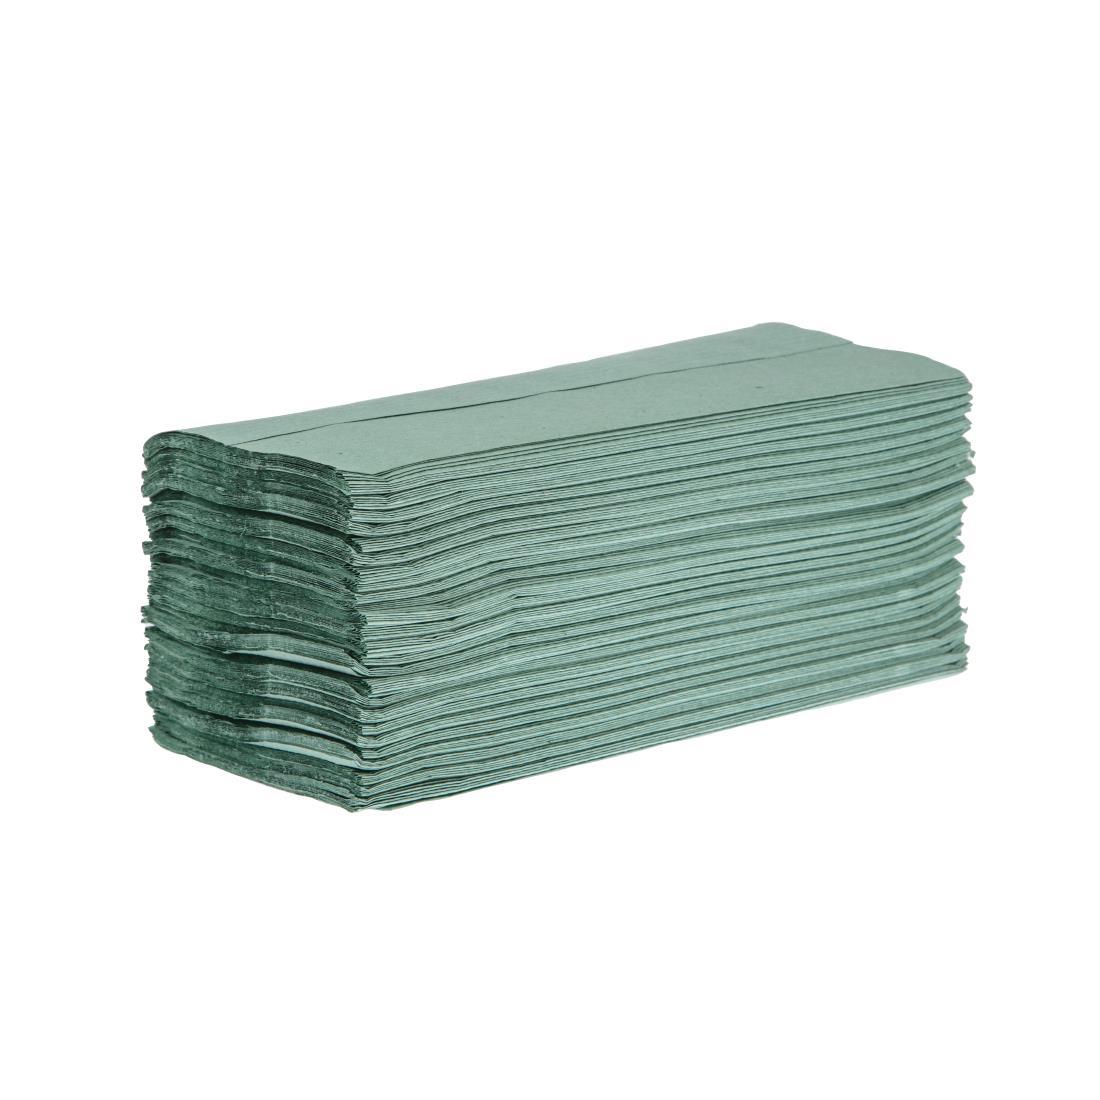 Jantex Z Fold Paper Hand Towels Green 1-Ply 250 Sheets (Pack of 12) - DL923  - 1